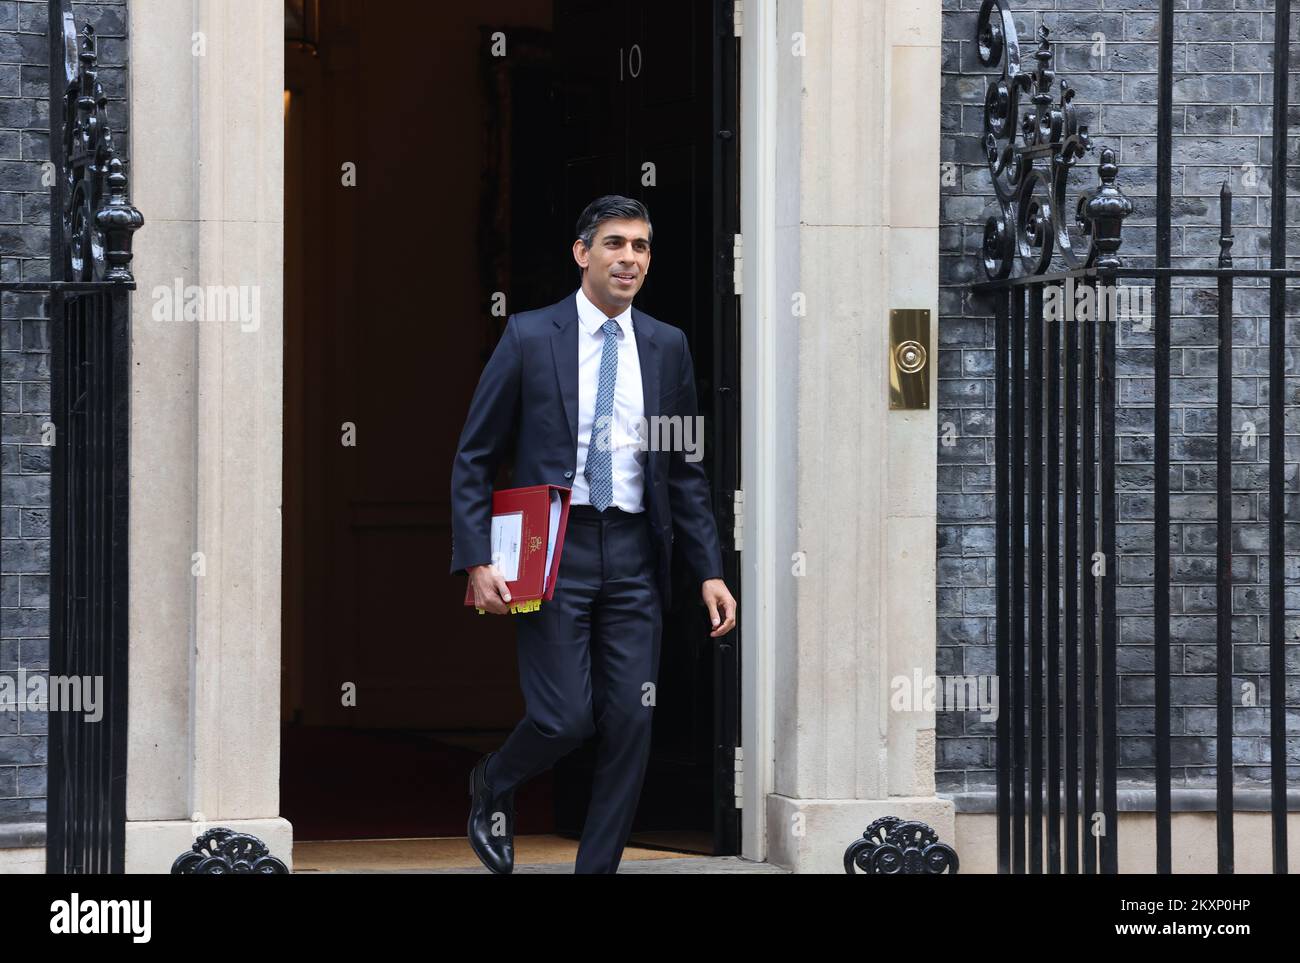 PM, Rishi Sunak, leaving Number 10 Downing Street for PM's Question Time at the House of Commons, London, UK Stock Photo